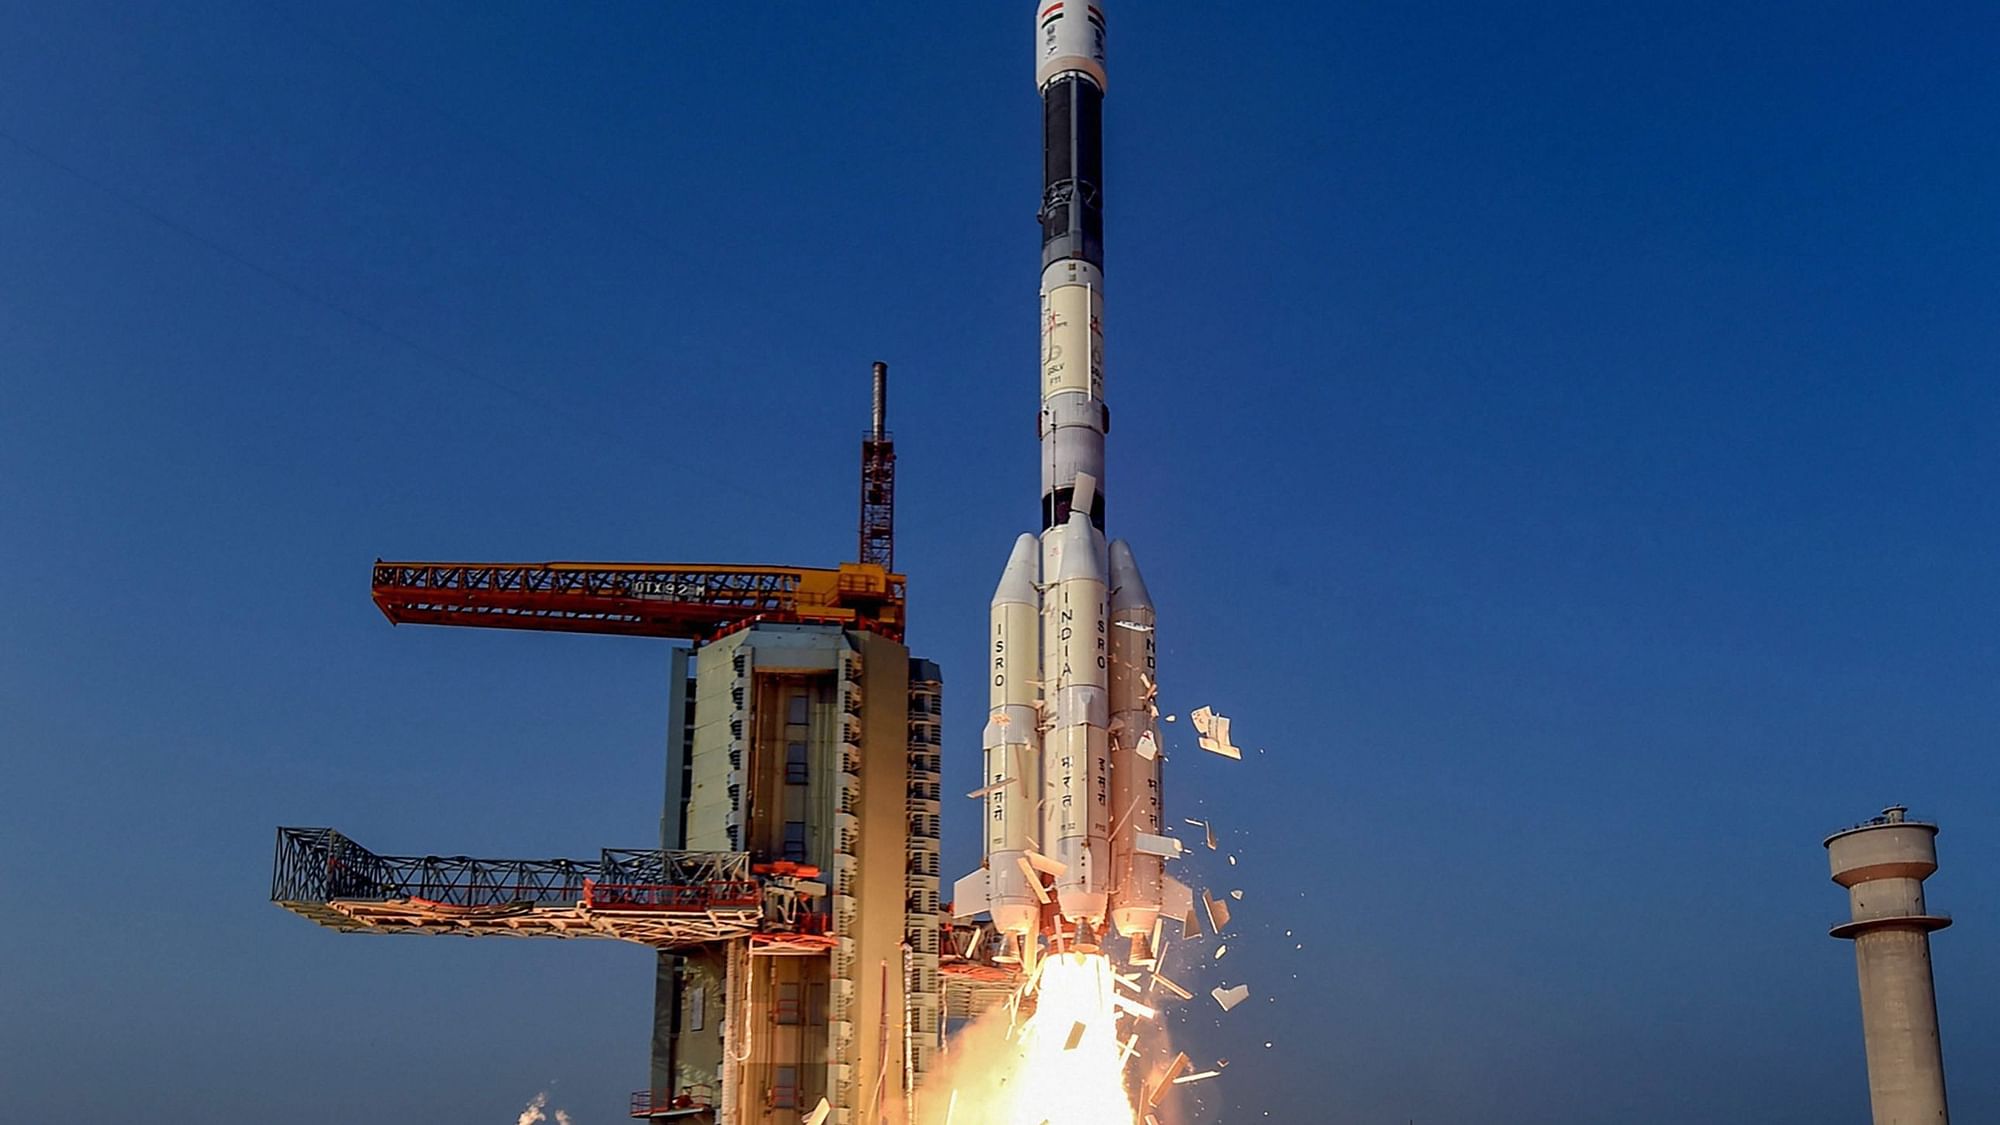  Indian Space Research Organisations (ISRO) communication Satellite GSAT-7A, on board the GSLV-F11, takes off during its launch in Sriharikota.